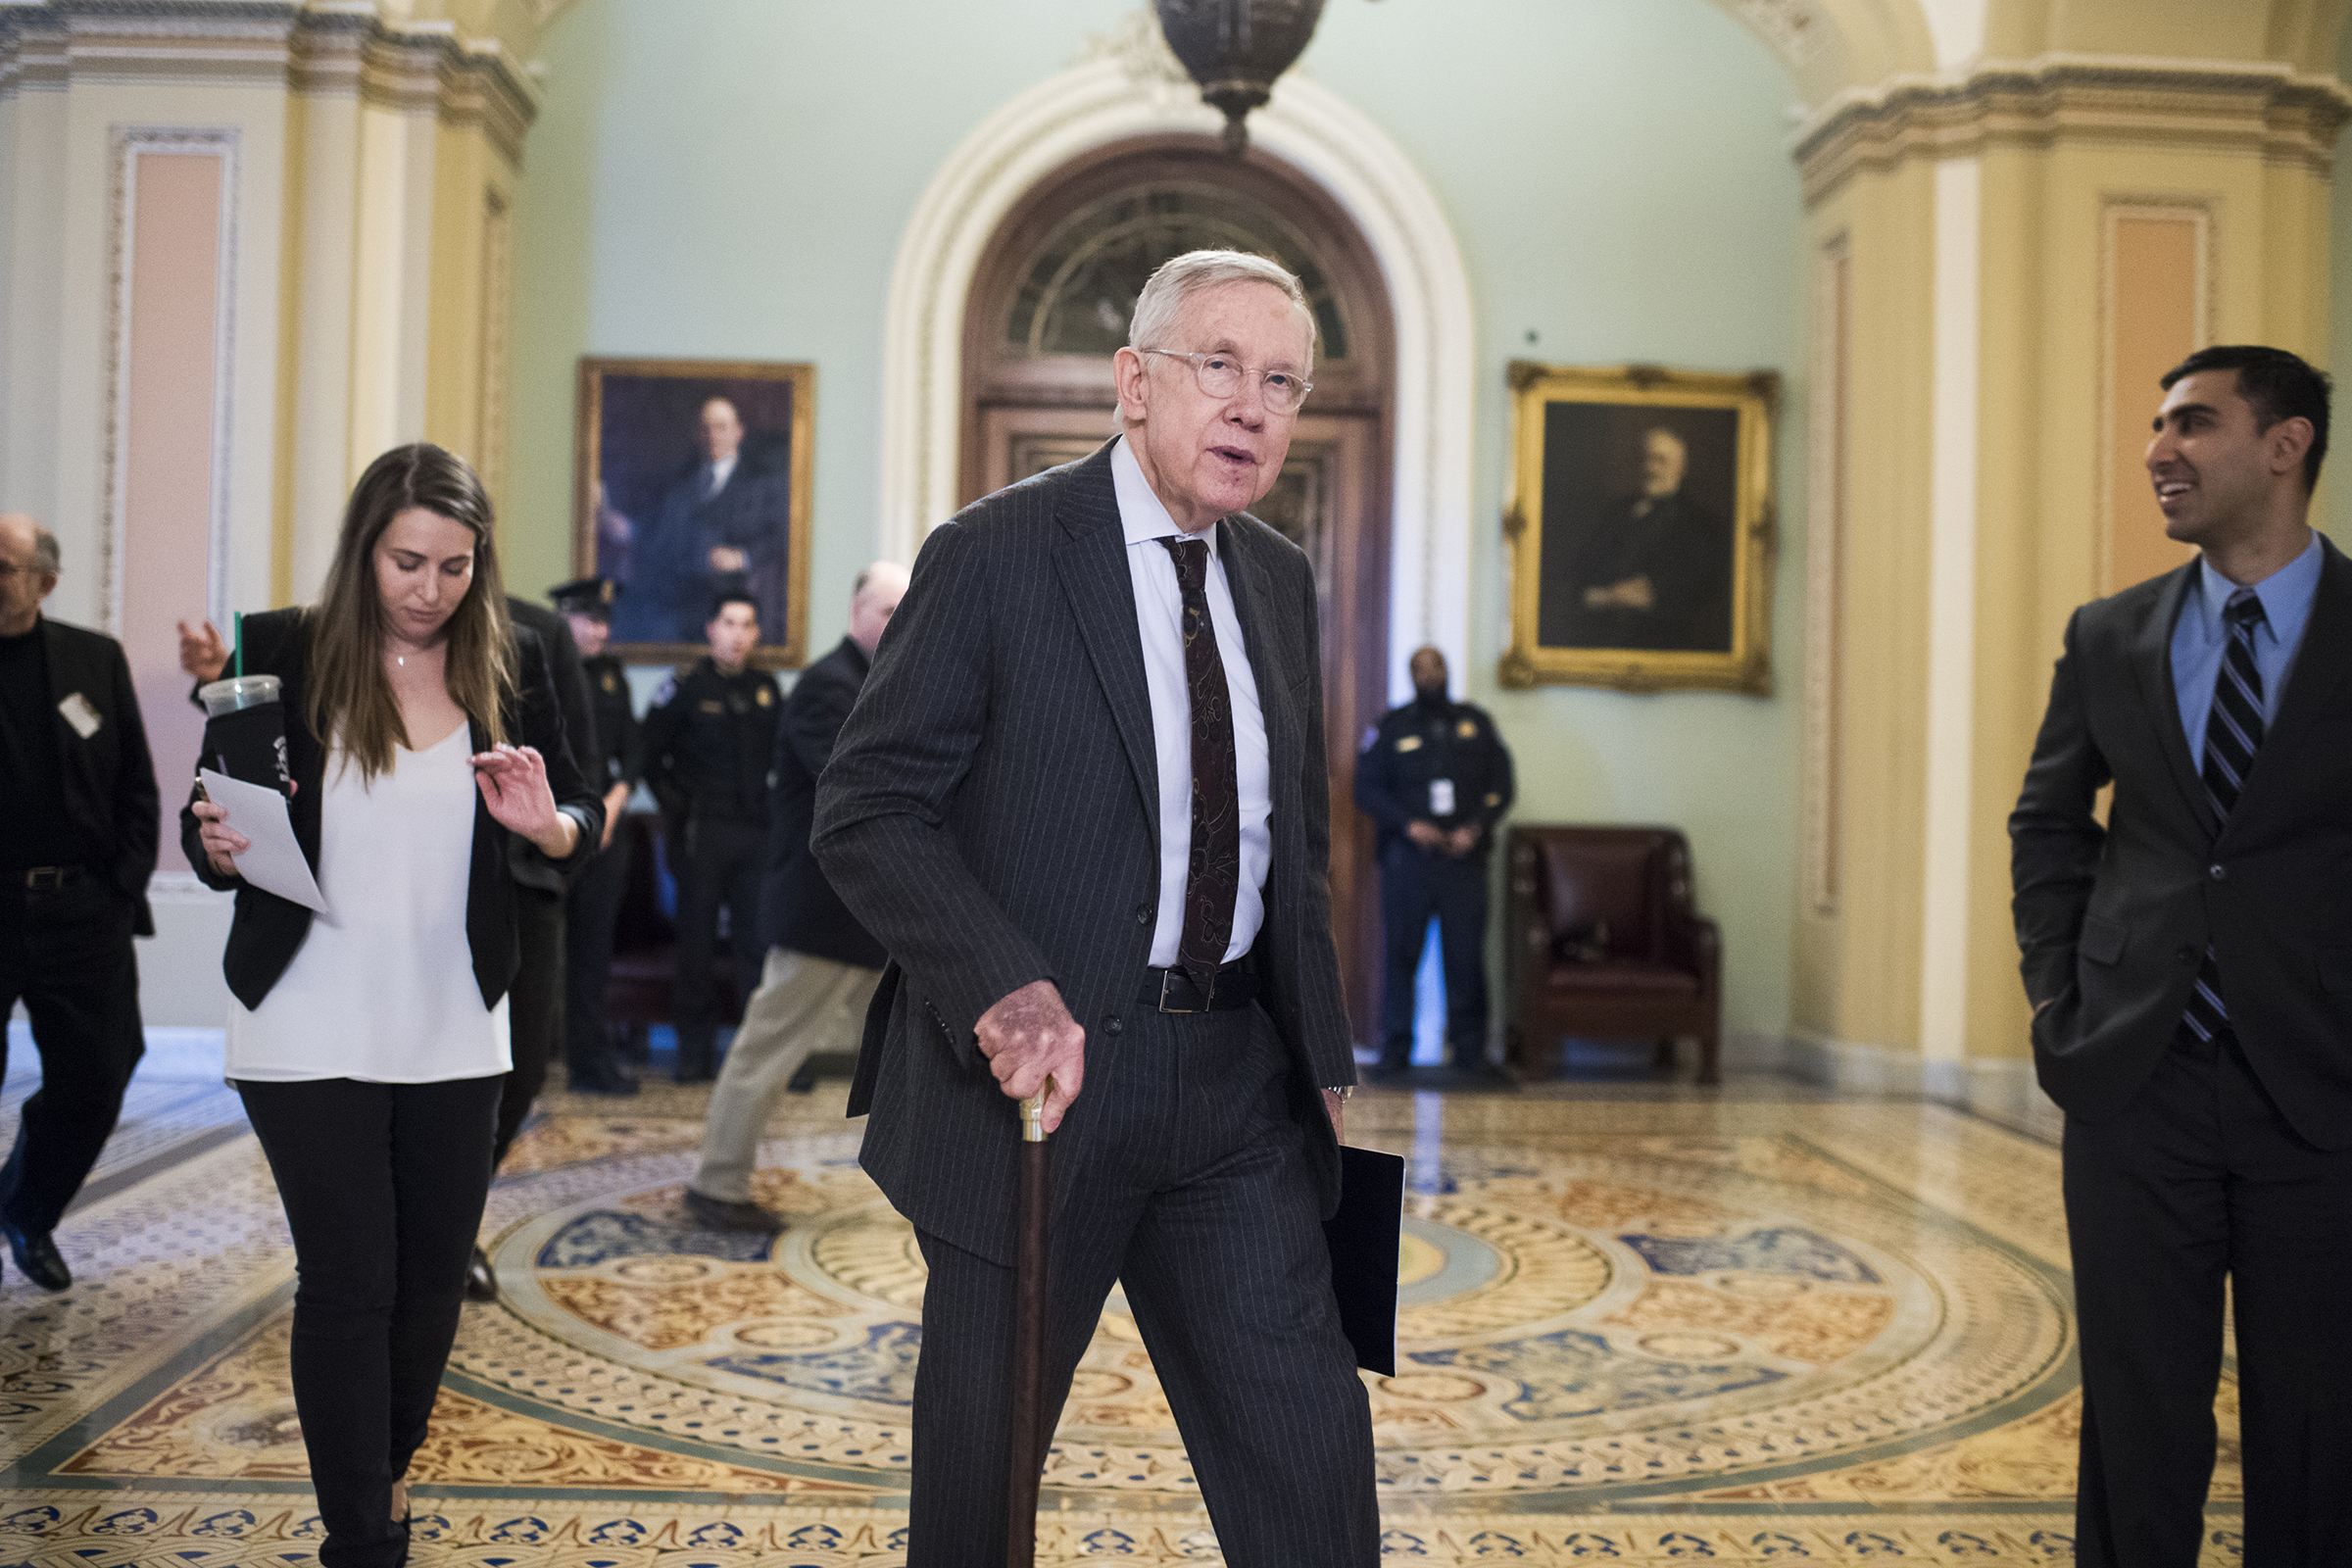 Senate Minority Leader Harry Reid makes his way to an easement signing ceremony in the Capitol to help protect Nevada's Basin and Range National Monument that contains artist Michael Heizer's modern art sculpture "City," Dec. 15, 2016. (Tom Williams—CQ-Roll Call/Getty Images)